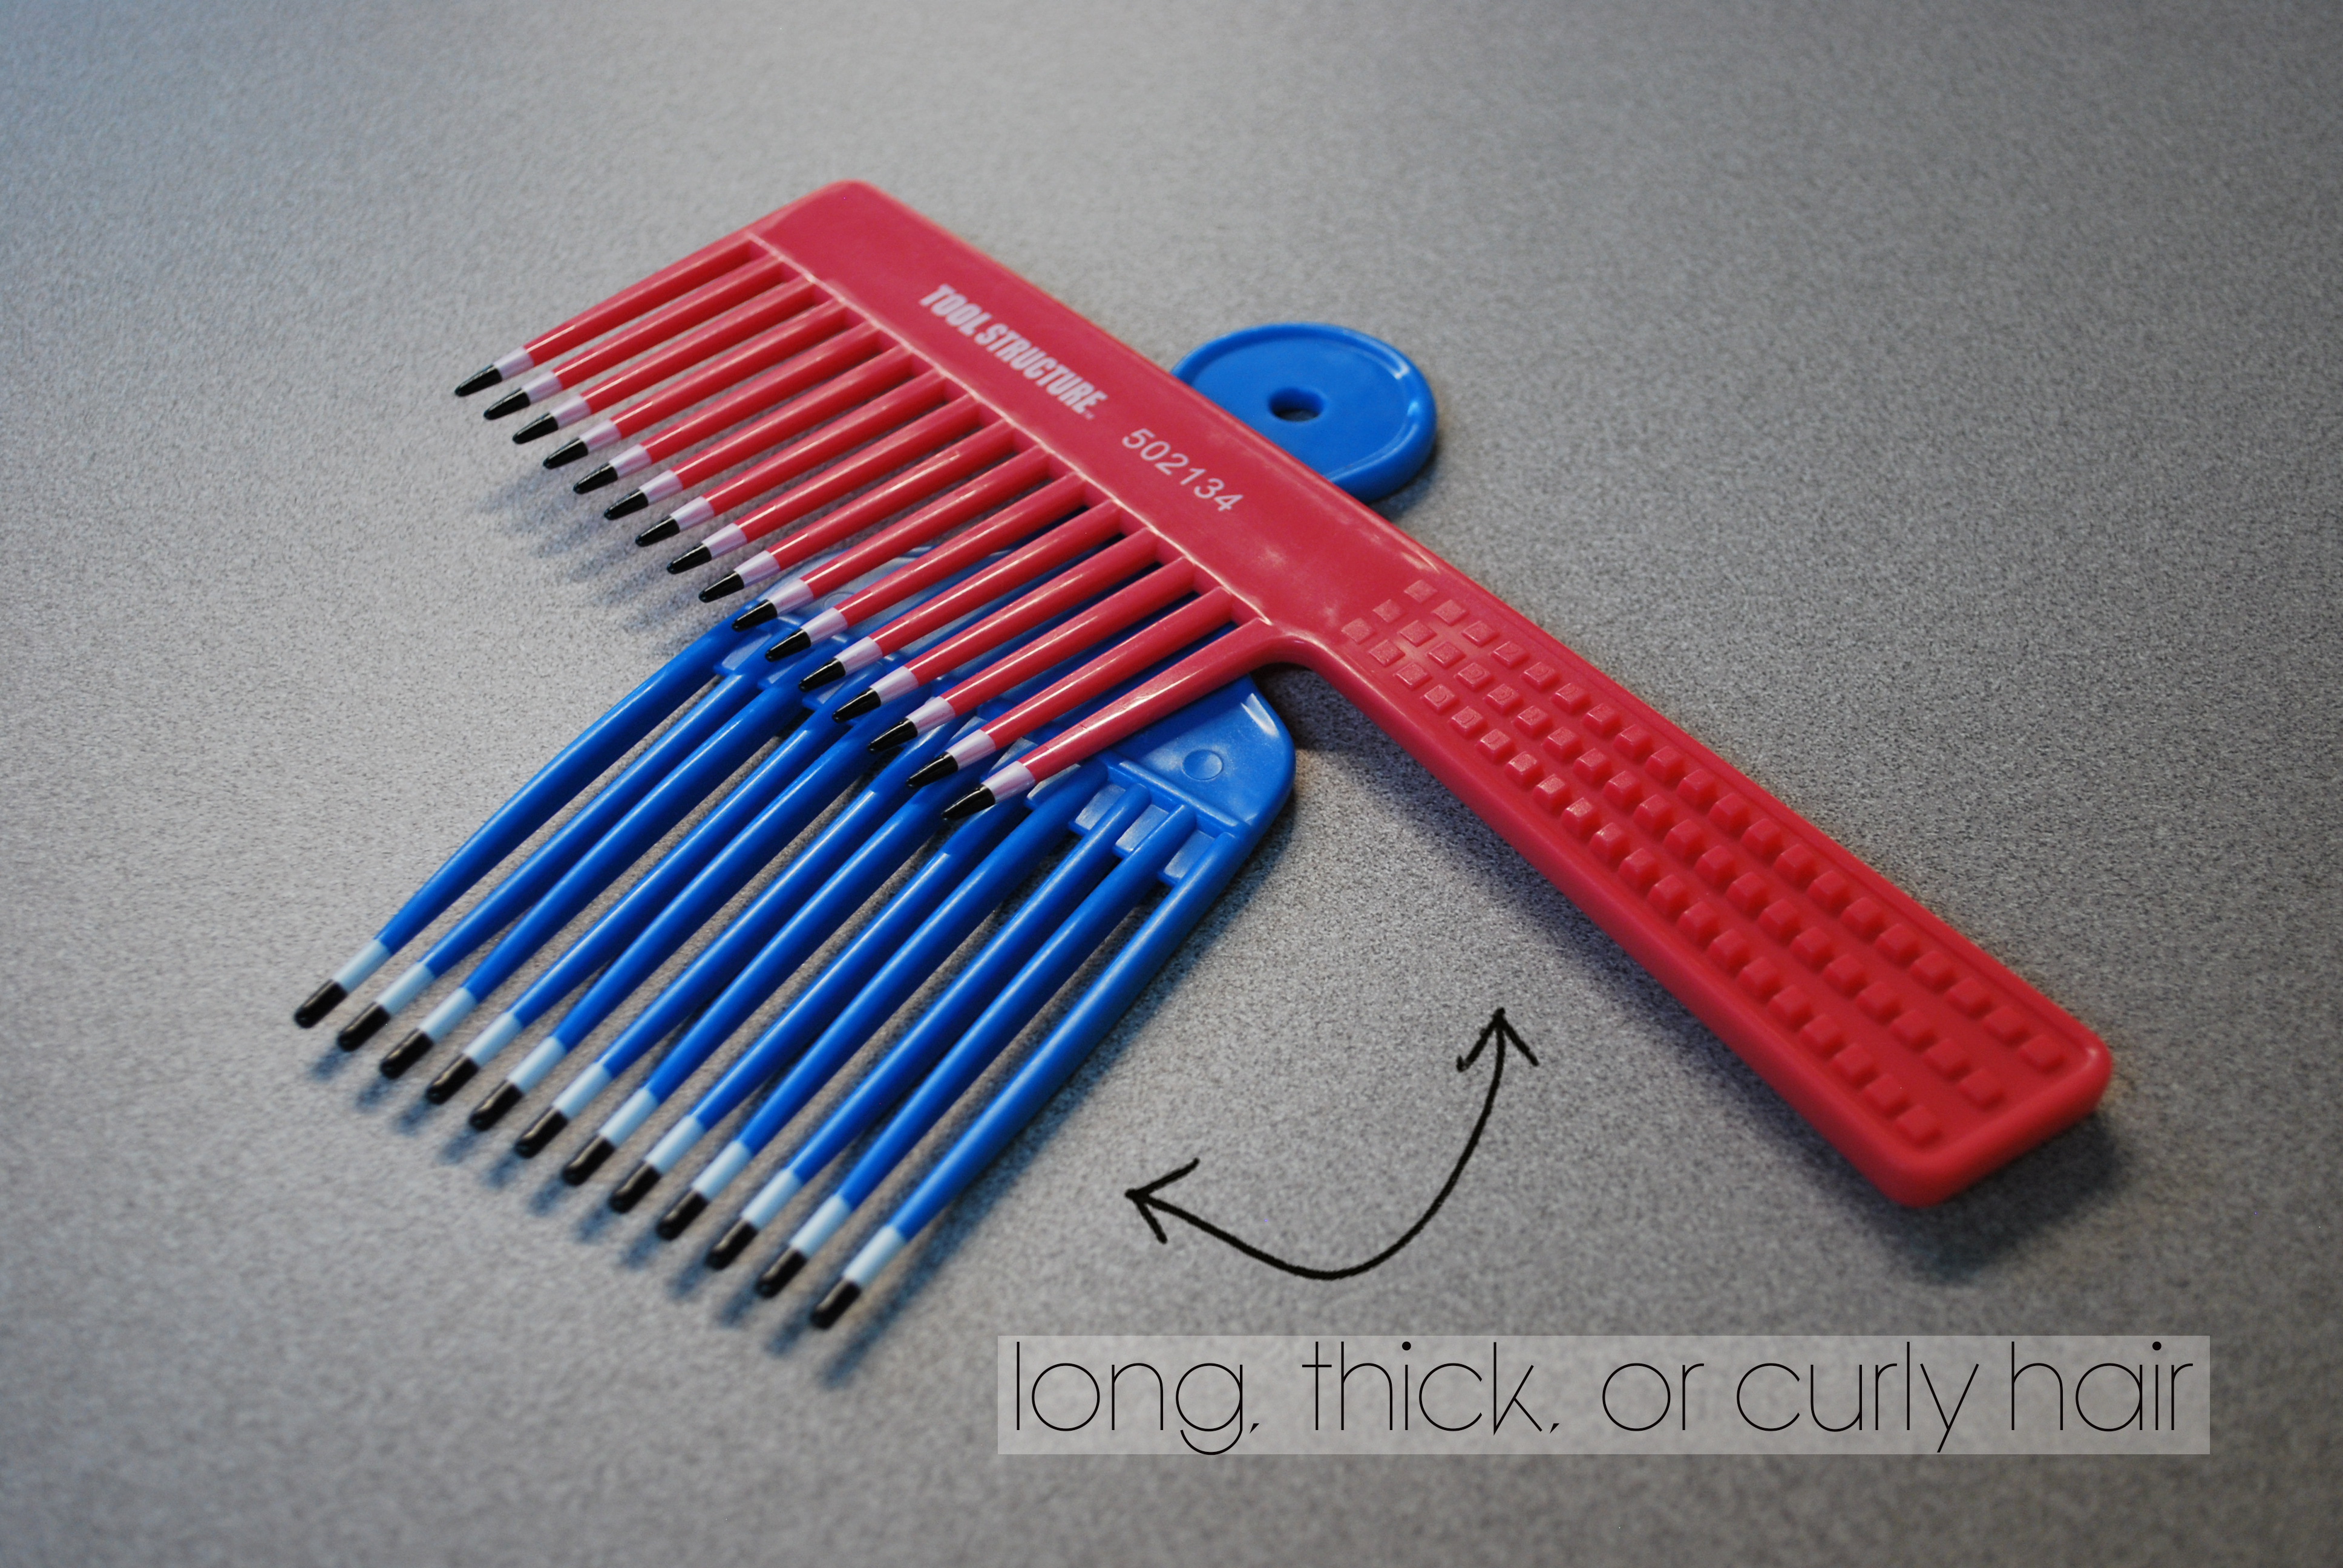 Combs for long, thick, or curly hair